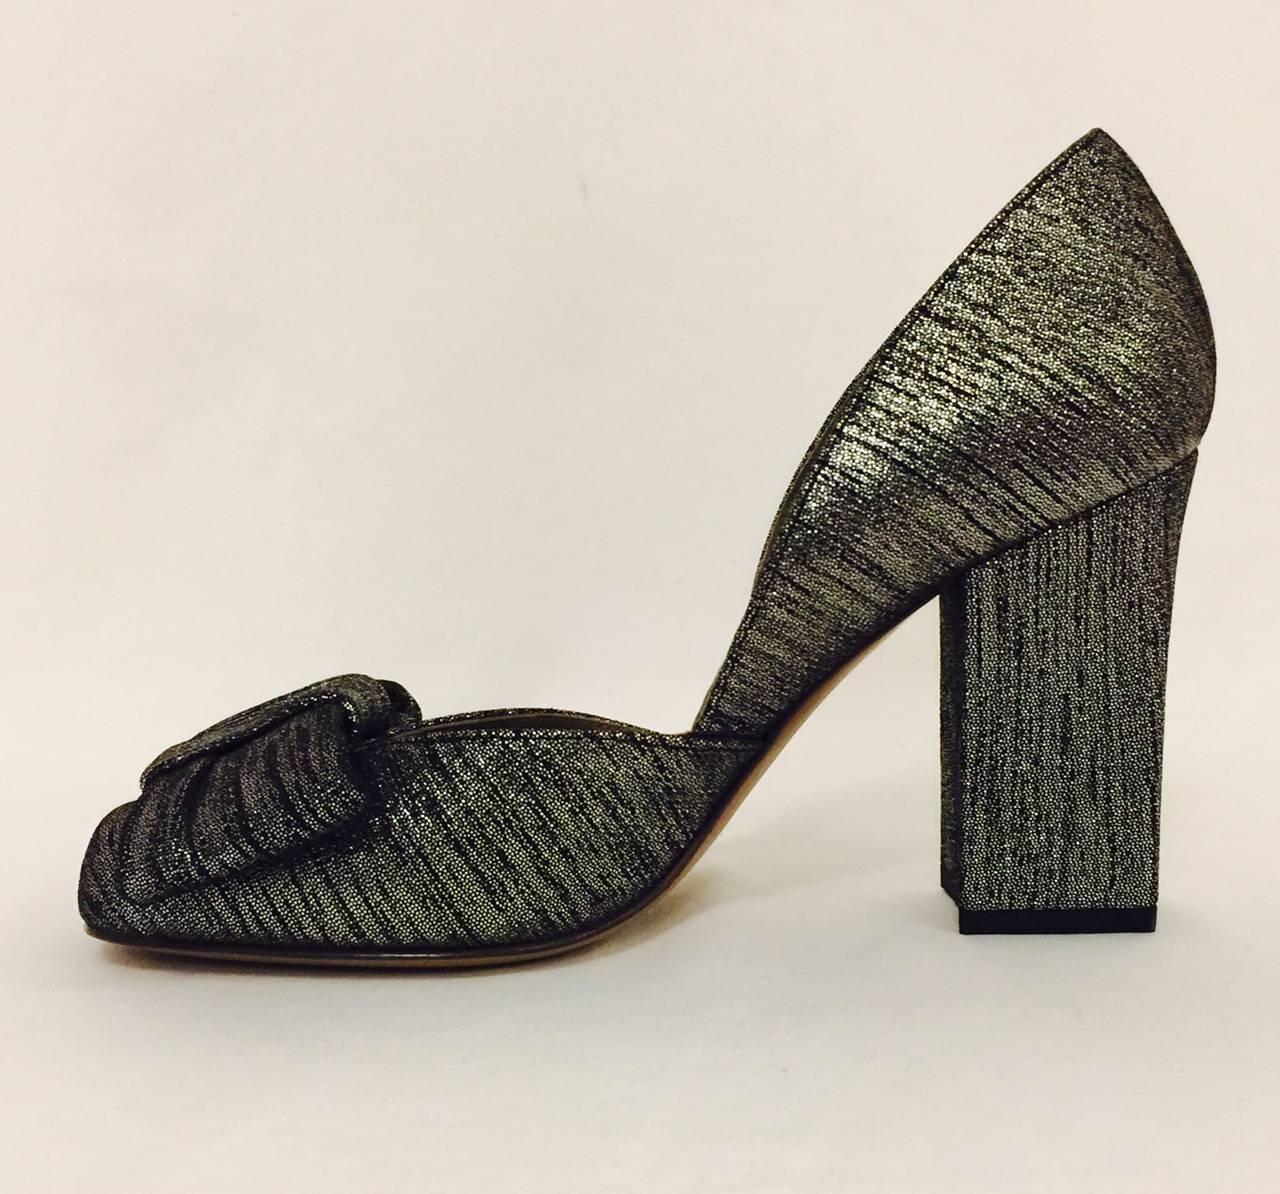 Marni Black and Silver Metallic Suede Evening Pumps add a new dimension to "Evening".  Shoes feature rounded square toes and covered high block heels.  Leather soles, lining, and insoles.  A large flat bow finishes the look!  Made in